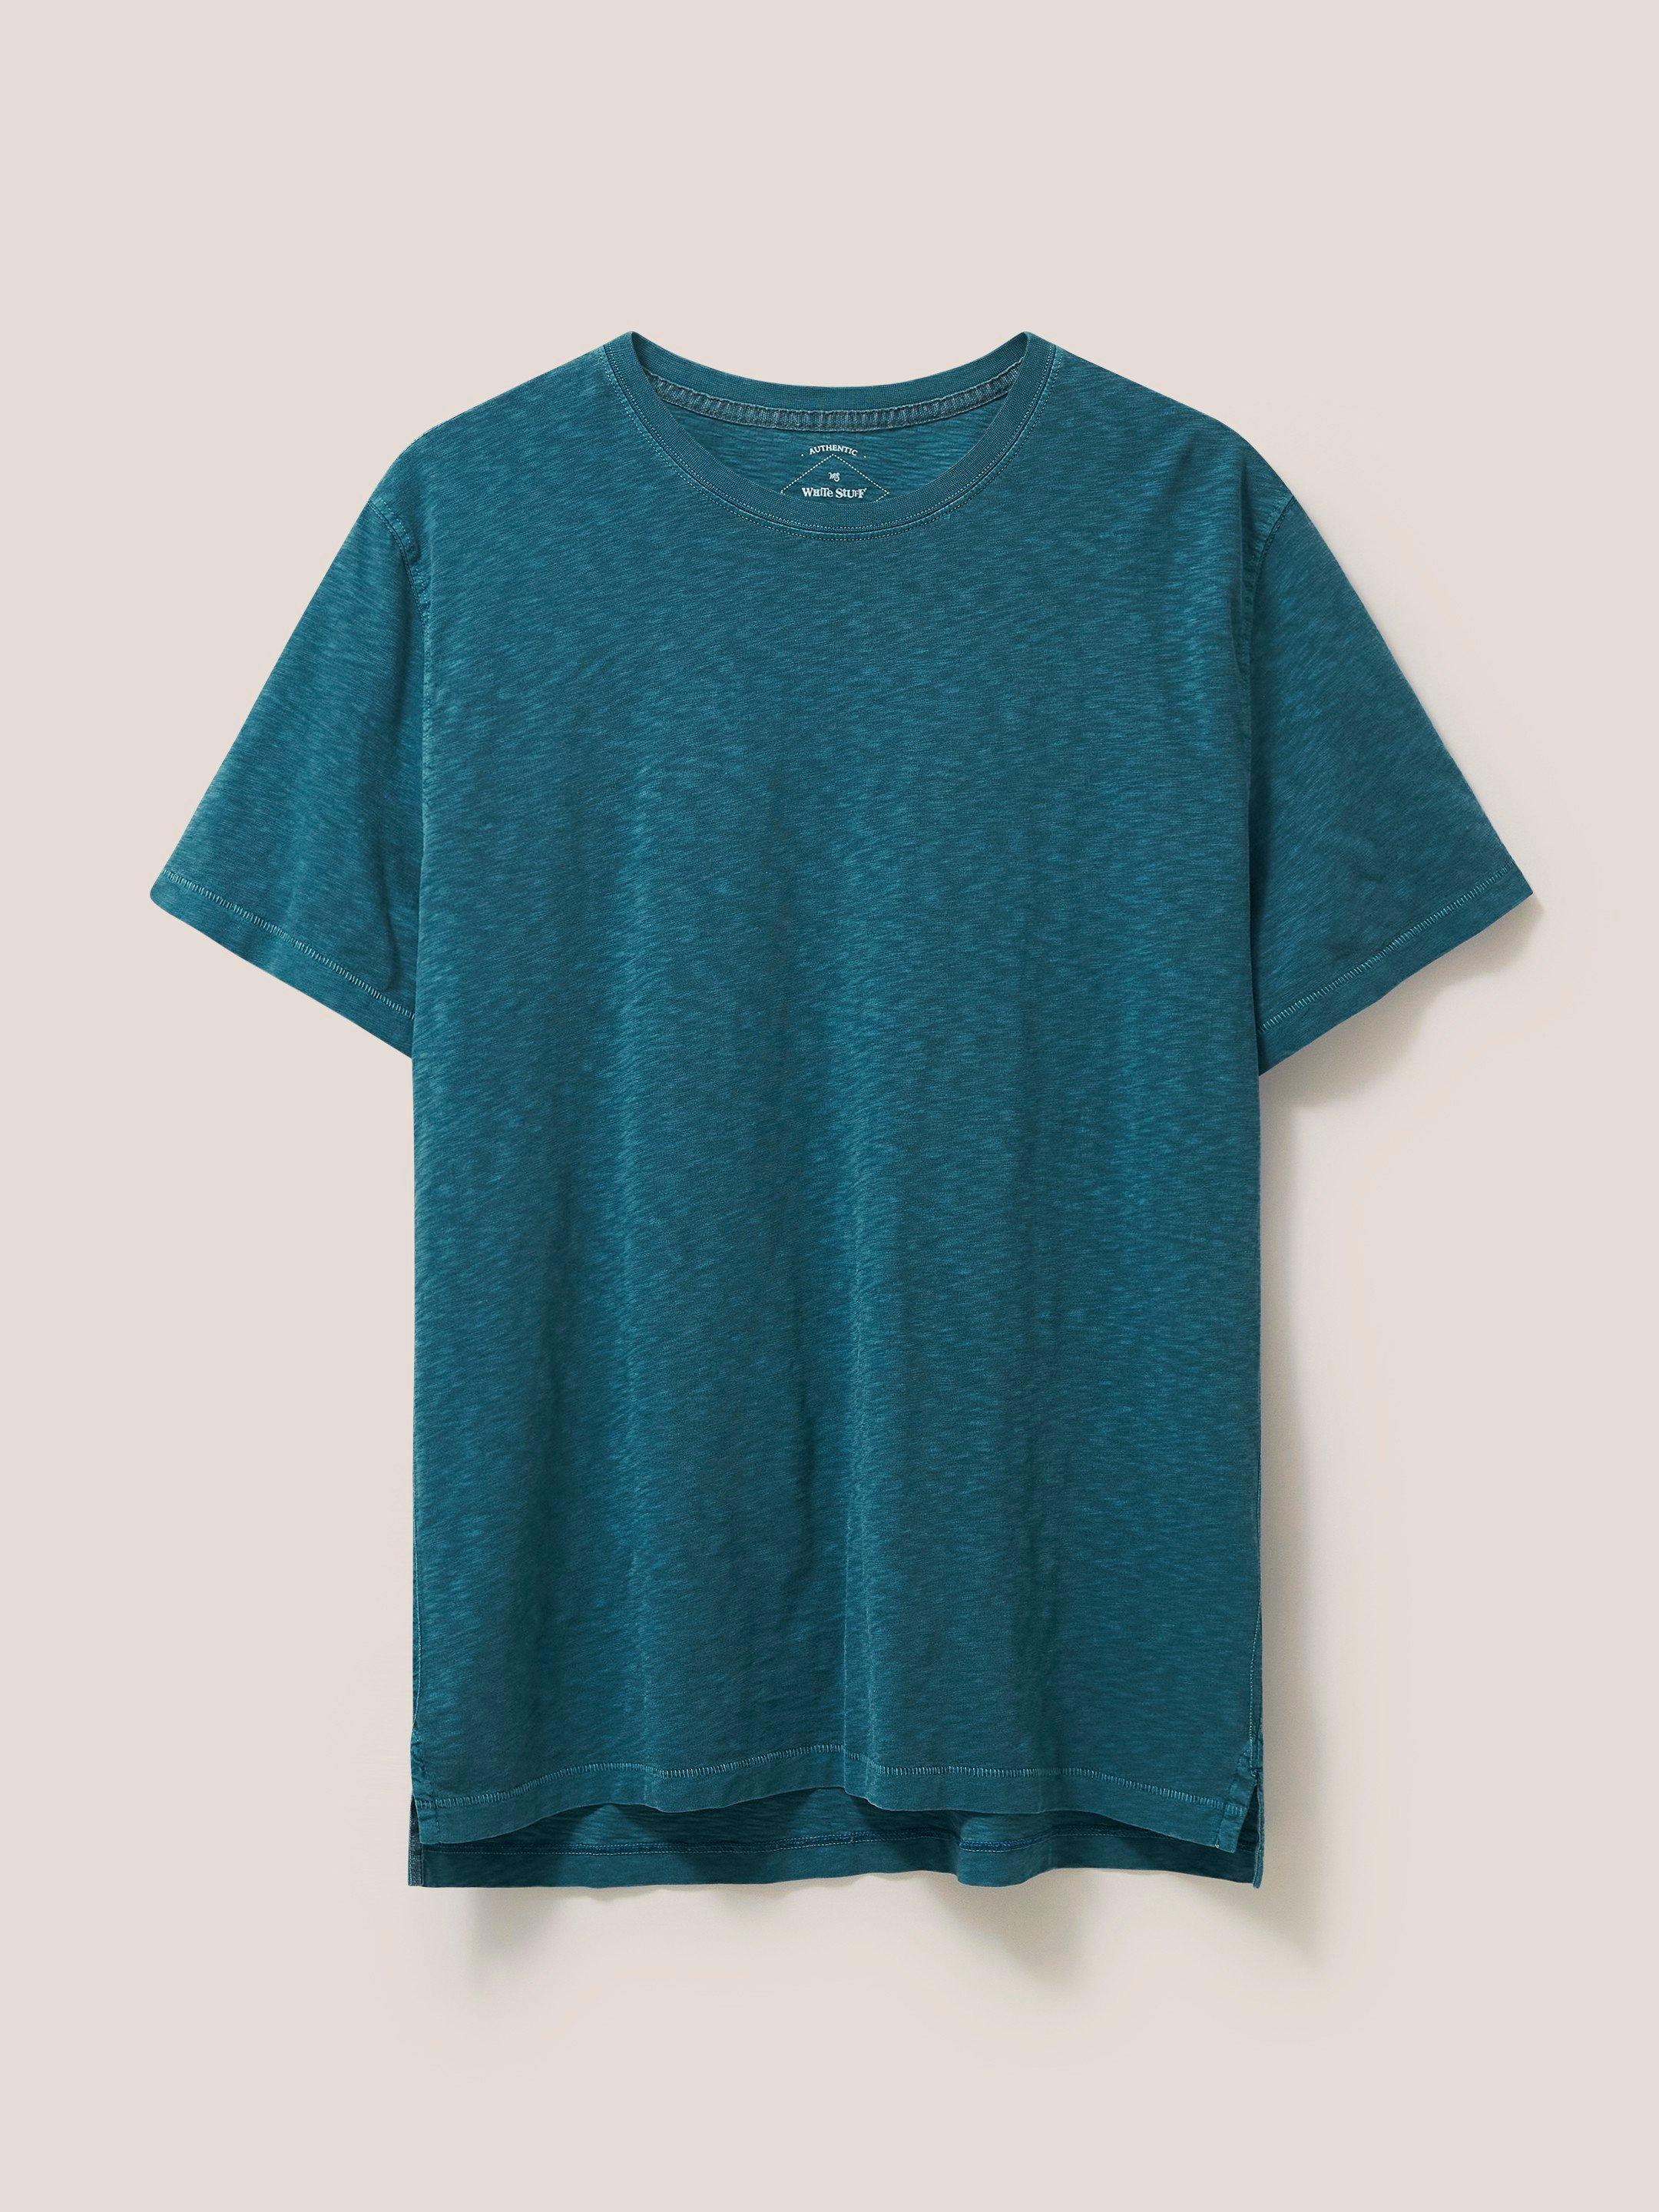 Abersoch Short Sleeve Tee in MID TEAL - FLAT FRONT